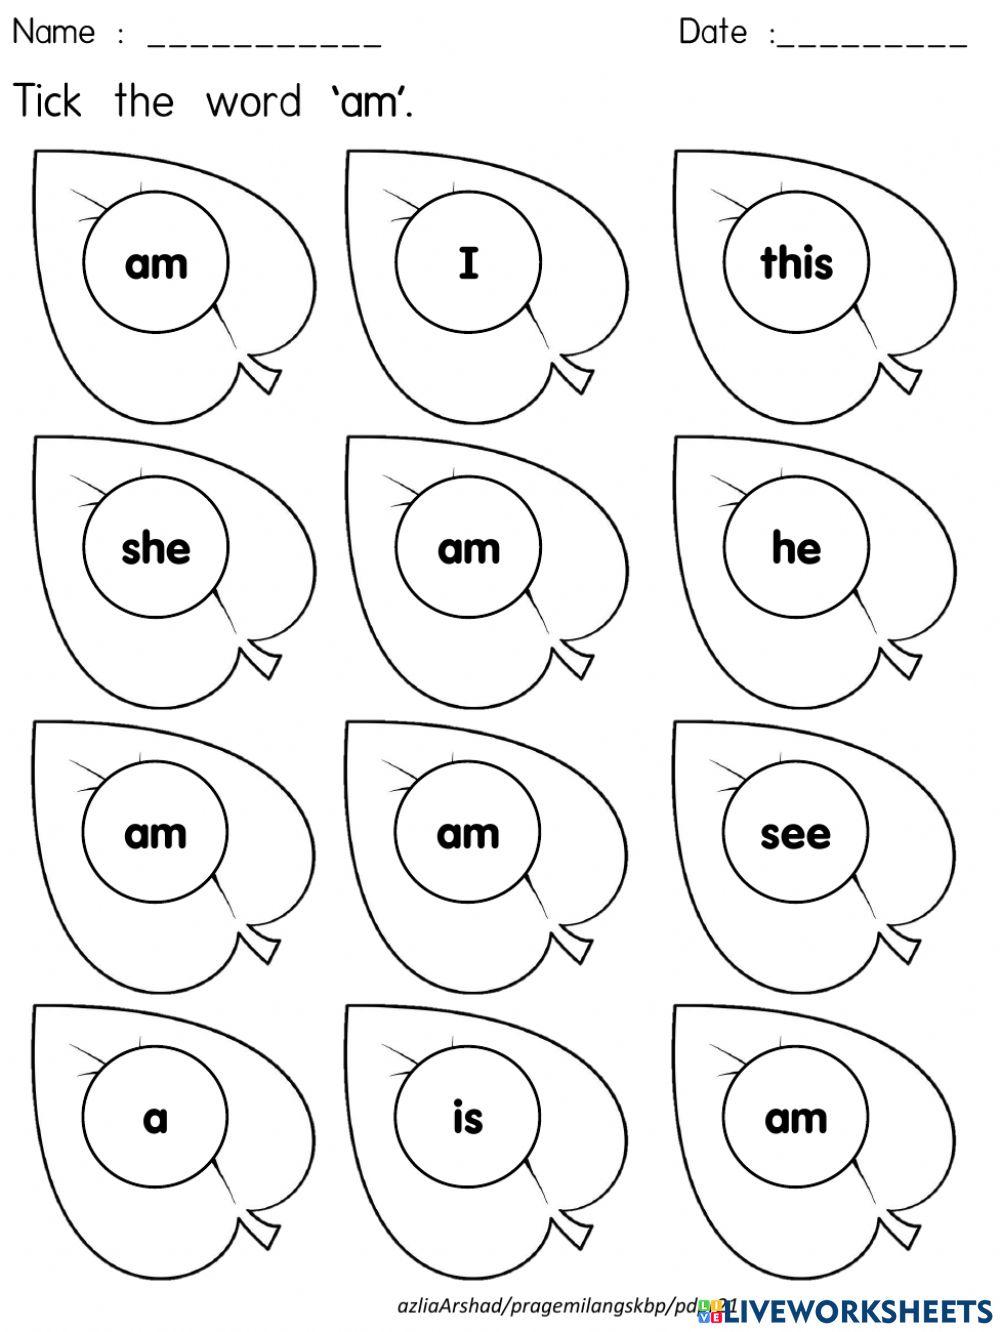 High frequency words 3.0 3